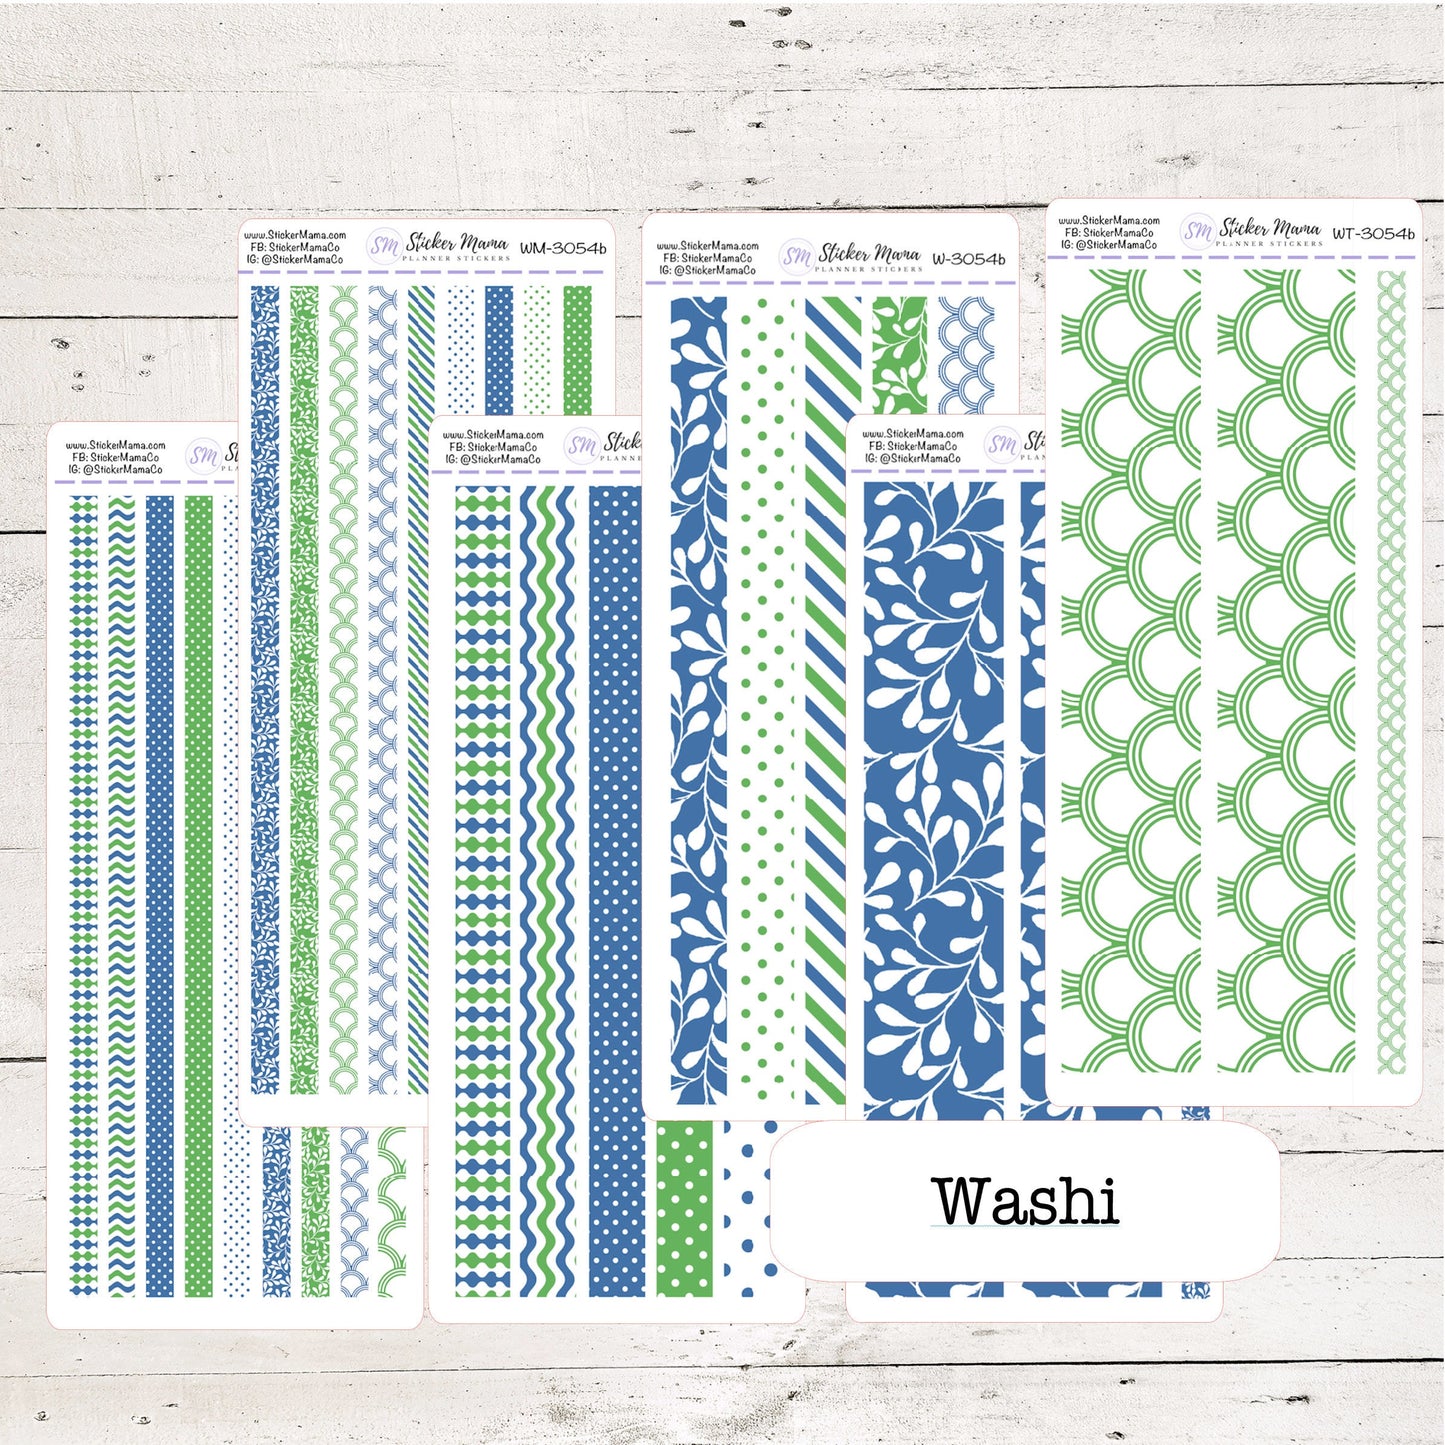 W-3054 - WASHI STICKERS - Polka Dot - Planner Stickers - Washi for Planners